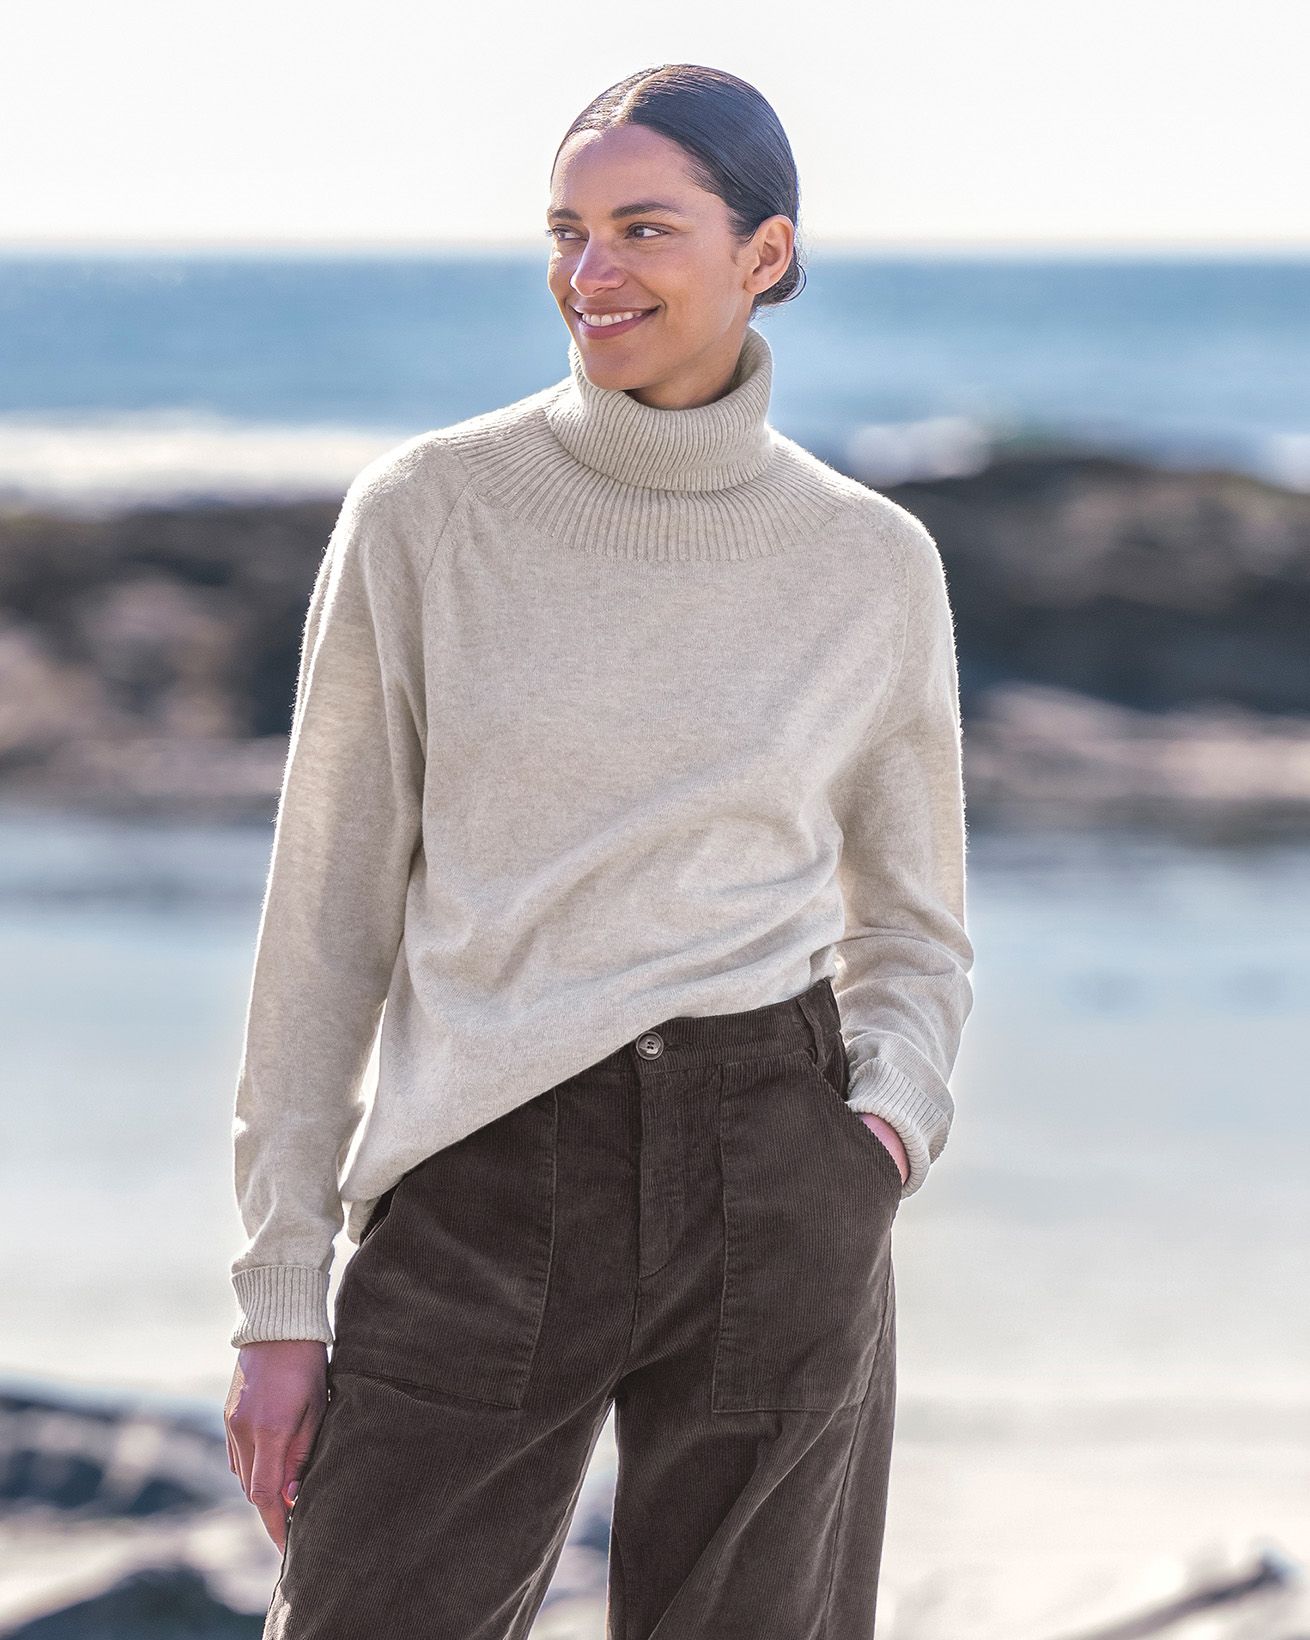 Geelong Slouch Roll Neck